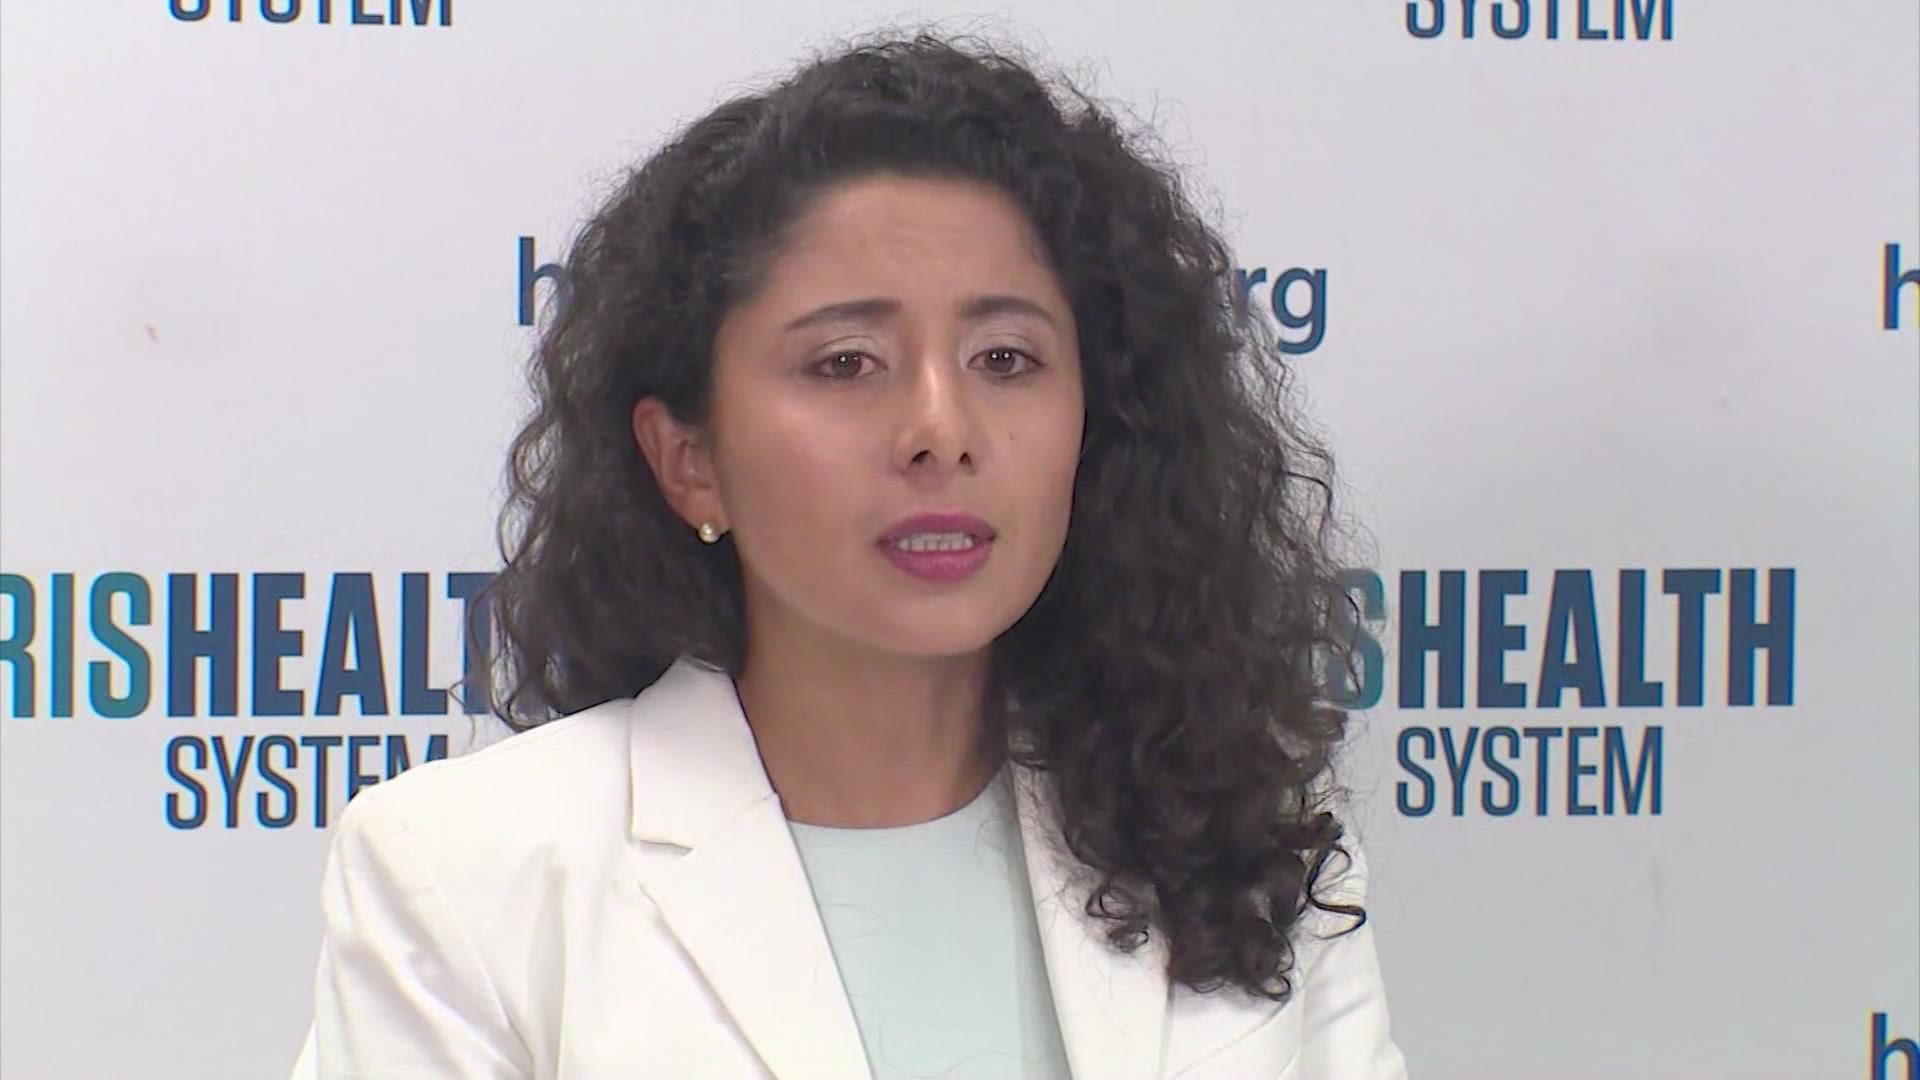 Hidalgo said doctors are ordering her to stay put for a couple of days to recuperate.